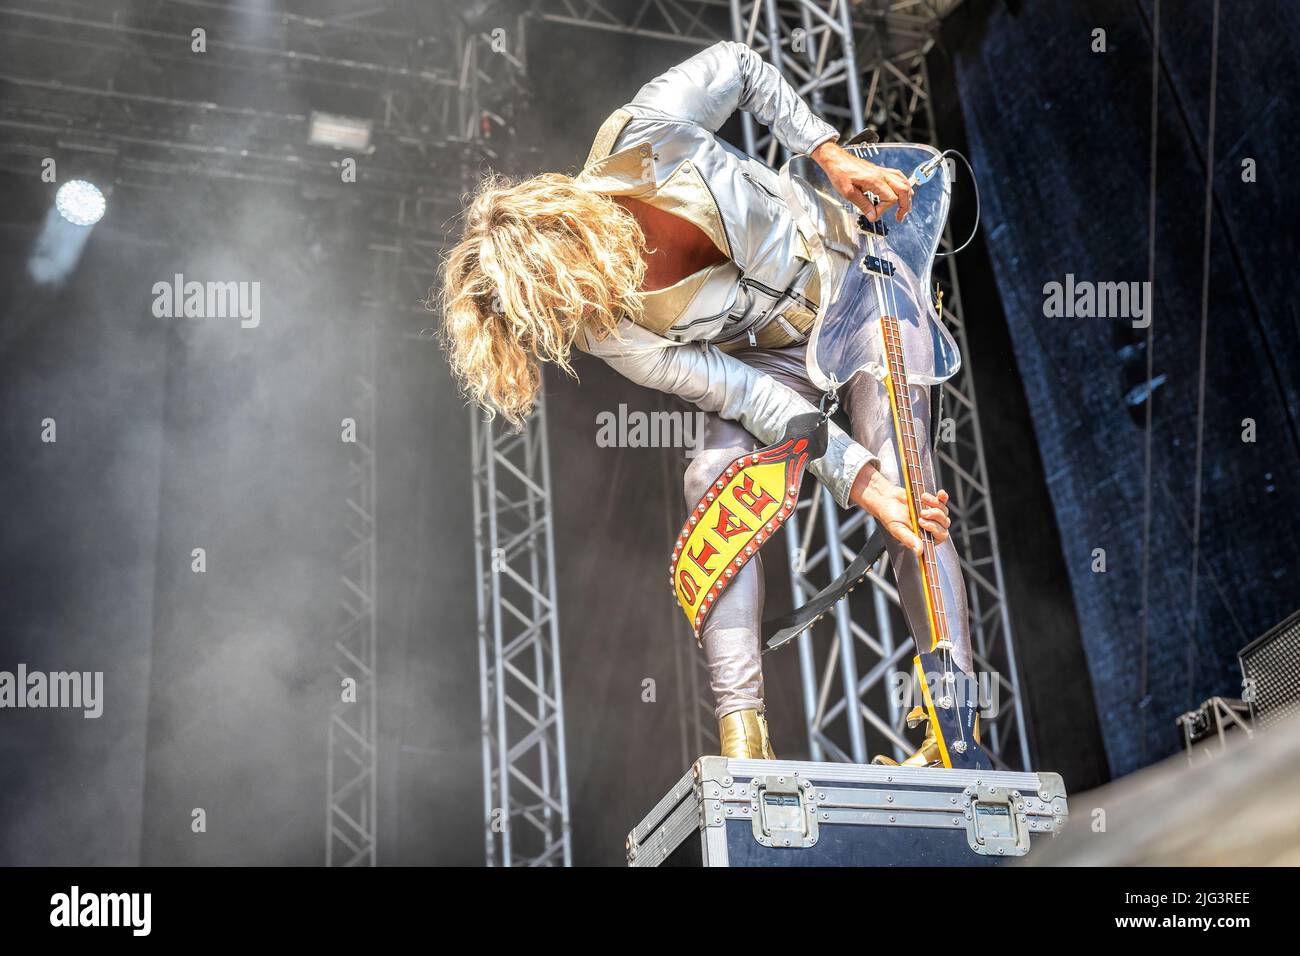 Oslo, Norway. 24th, June 2022. The Danish rock band D-A-D performs a live concert during the Norwegian music festival Tons of Rock 2022 in Oslo. Here bass player Stig Pedersen is seen live on stage. (Photo credit: Gonzales Photo - Terje Dokken). Stock Photo